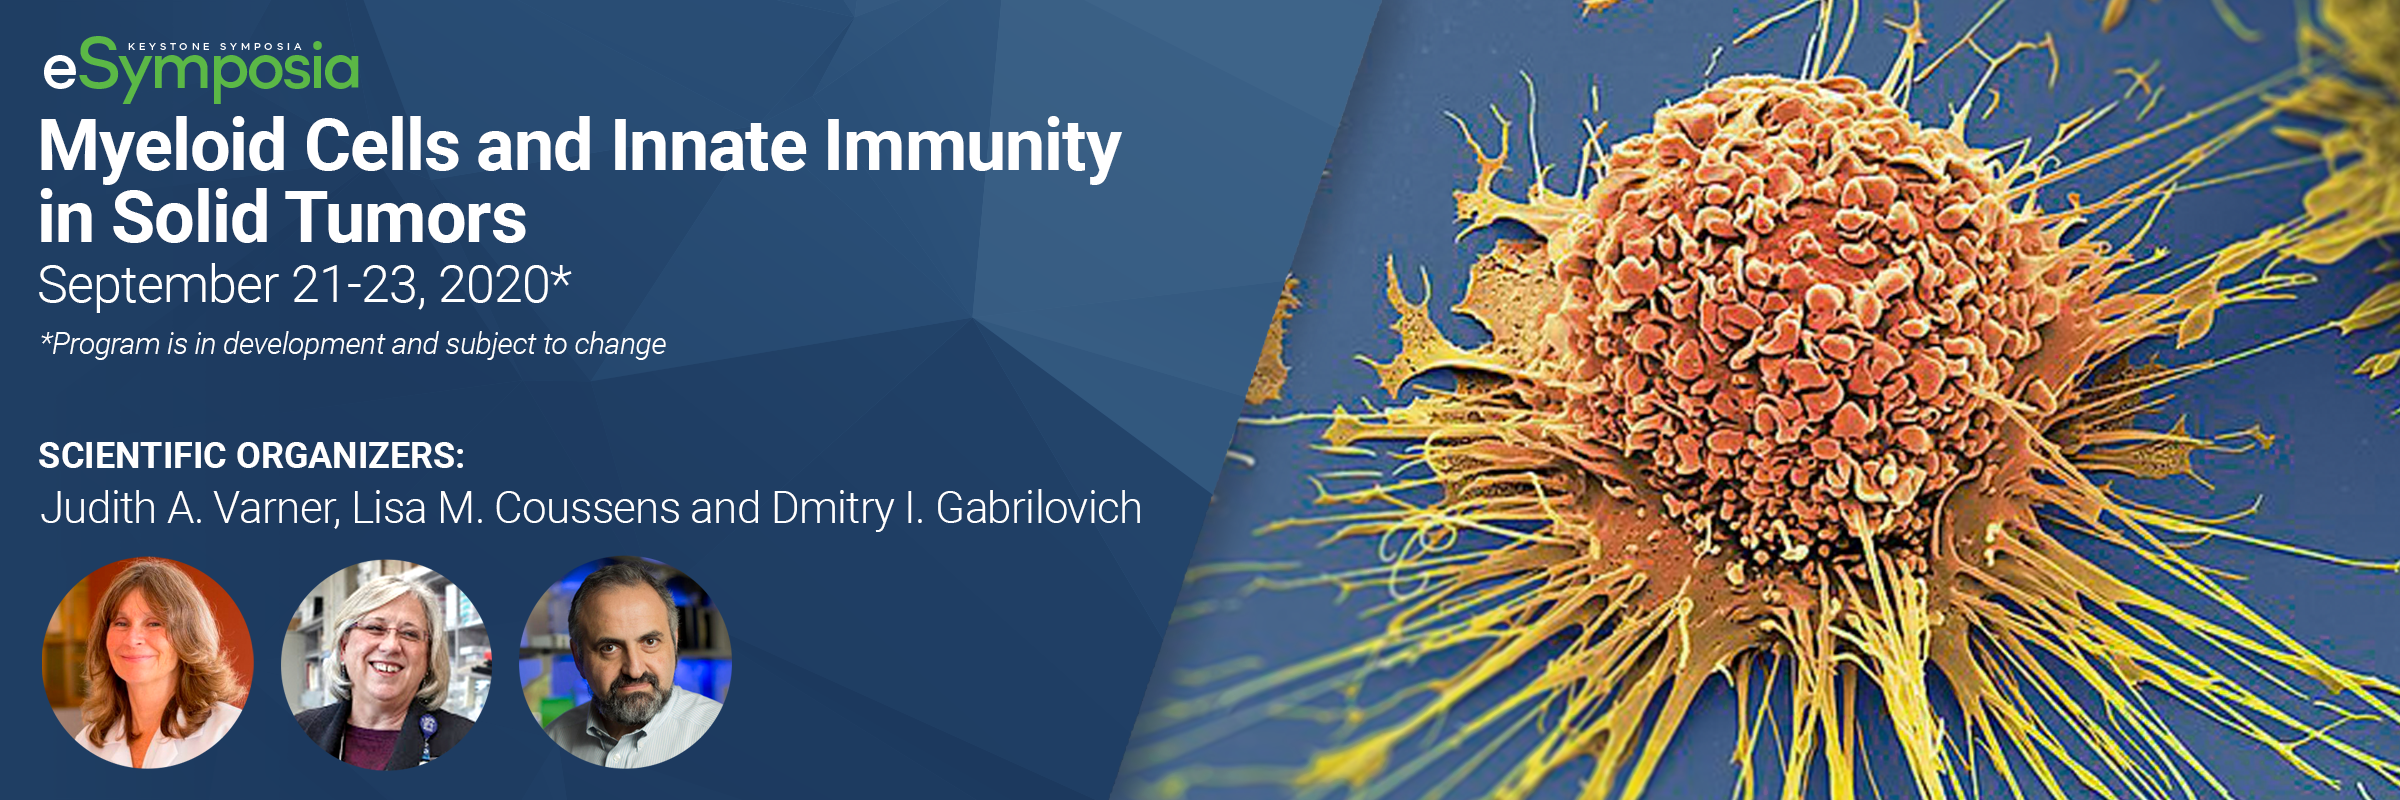 myeloid cells and innate immunity in solid tumors web banner